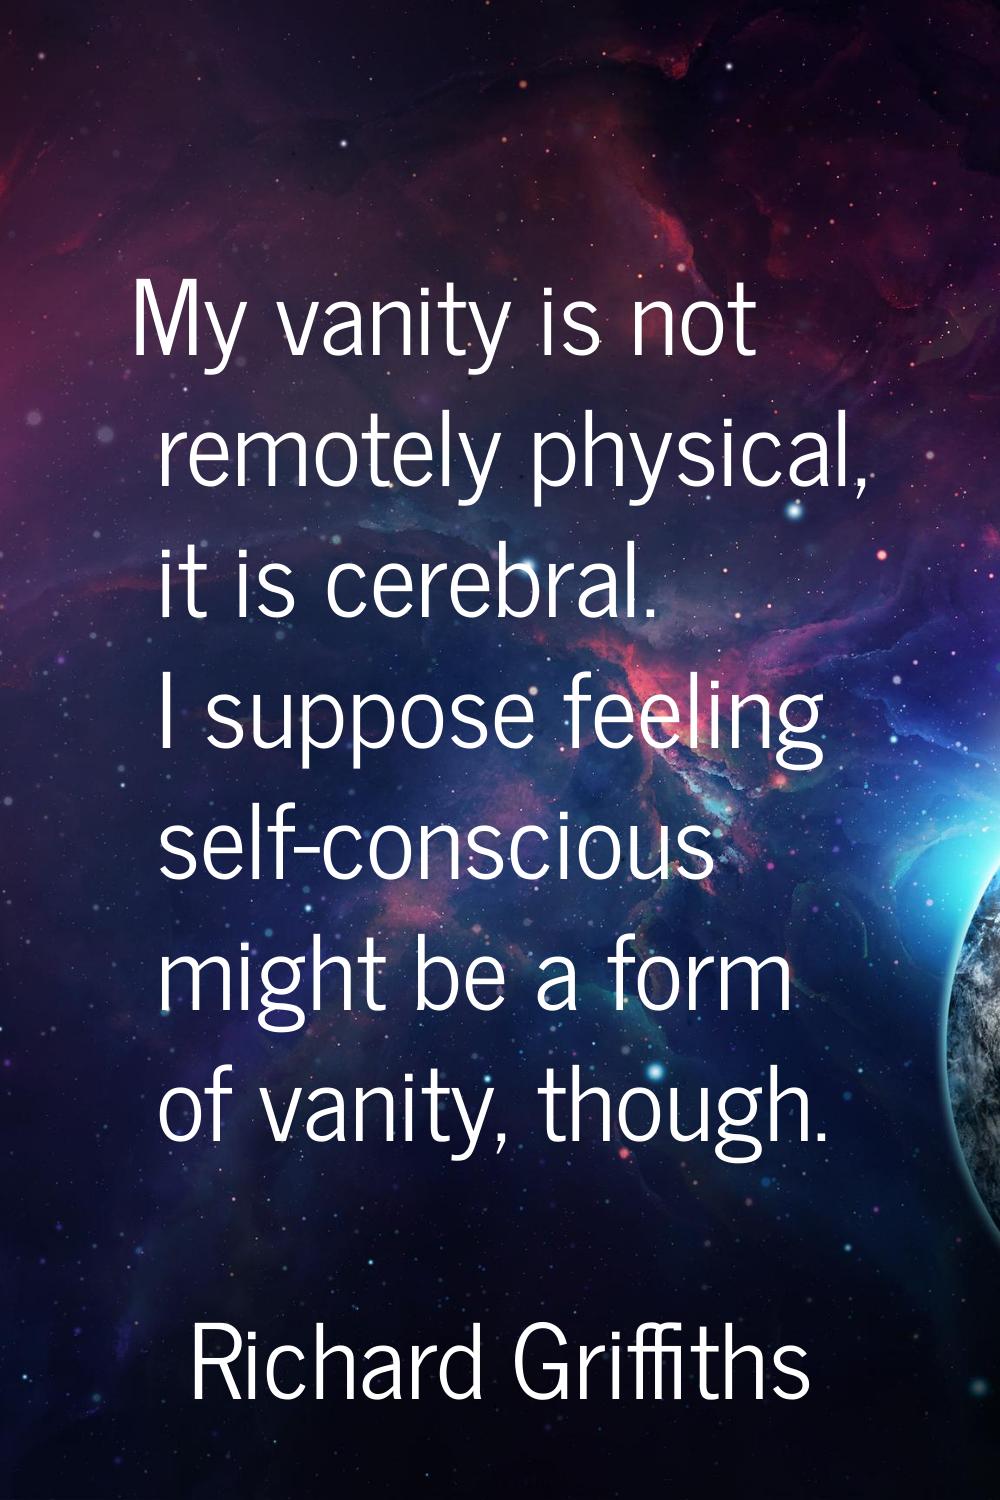 My vanity is not remotely physical, it is cerebral. I suppose feeling self-conscious might be a for